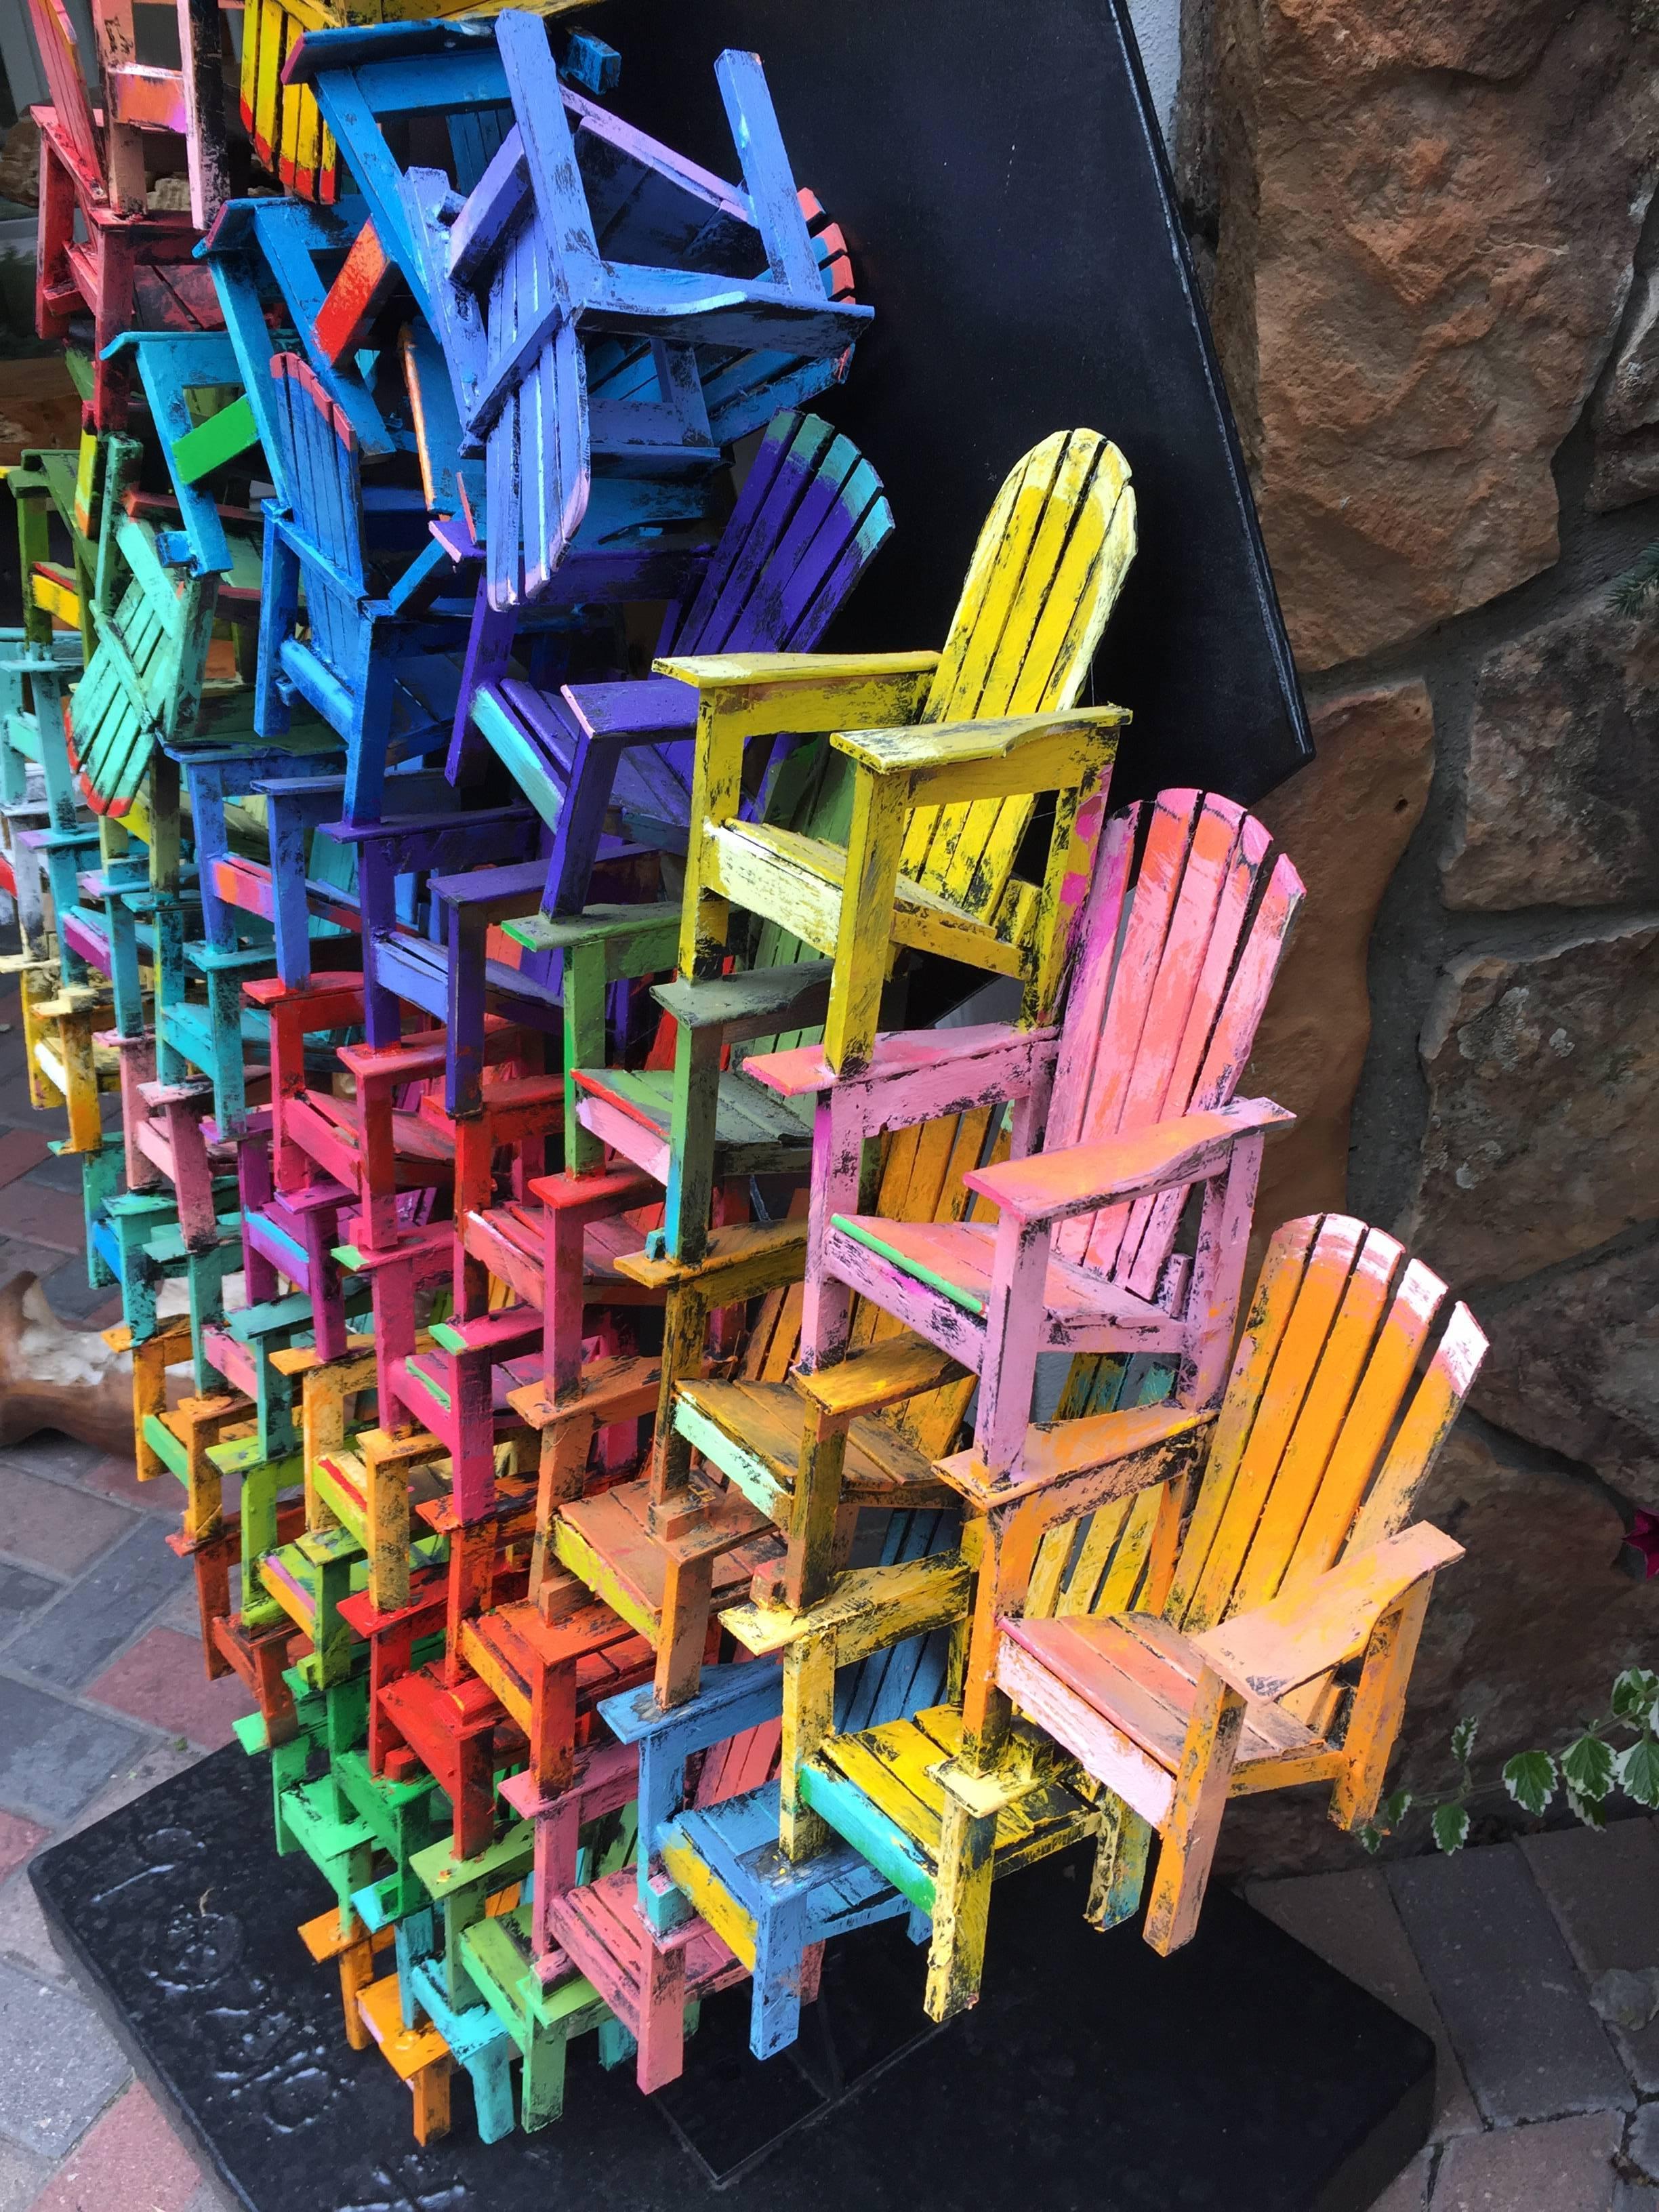 Paul Jacobsen uses everyday objects, such as chairs, cars, airplanes, trains, motorcycles and puzzles, all built from scratch and turns them into haunting and very desirable works of art. Among his most famous works are the Adirondack chair series,